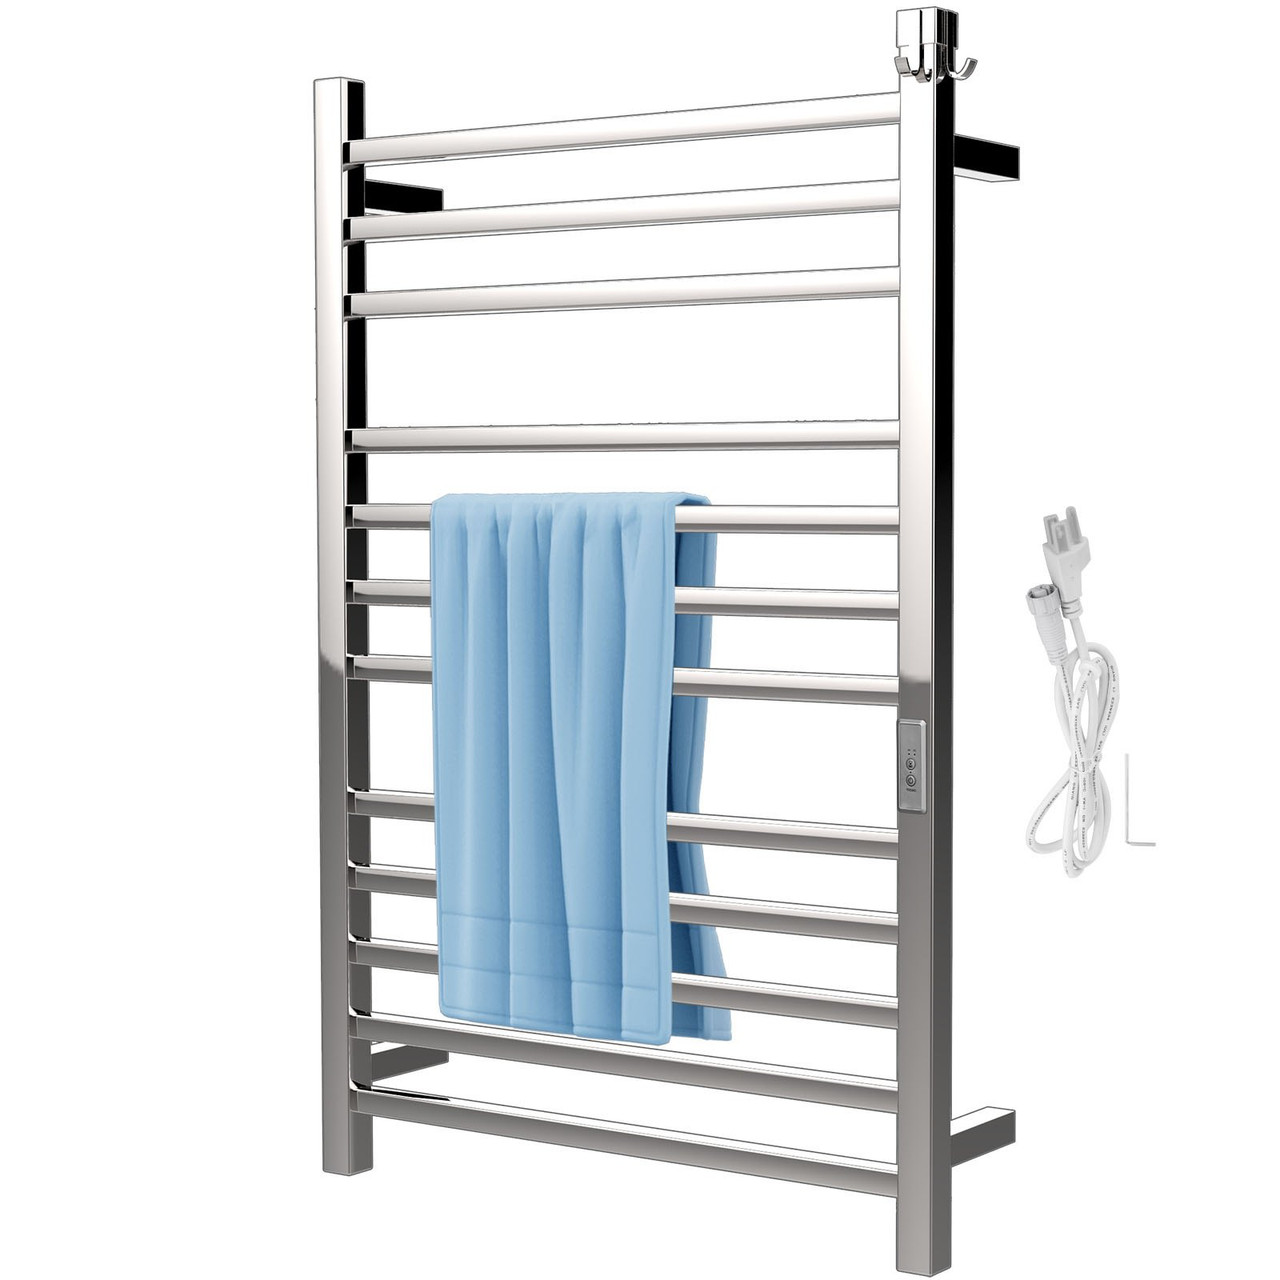 Heated Towel Rack, 12 Bars Design, Mirror Polished Stainless Steel Electric Towel Warmer with Built-in Timer, Wall-Mounted for Bathroom, Plug-in/Hardwired, UL Certificated, Silver